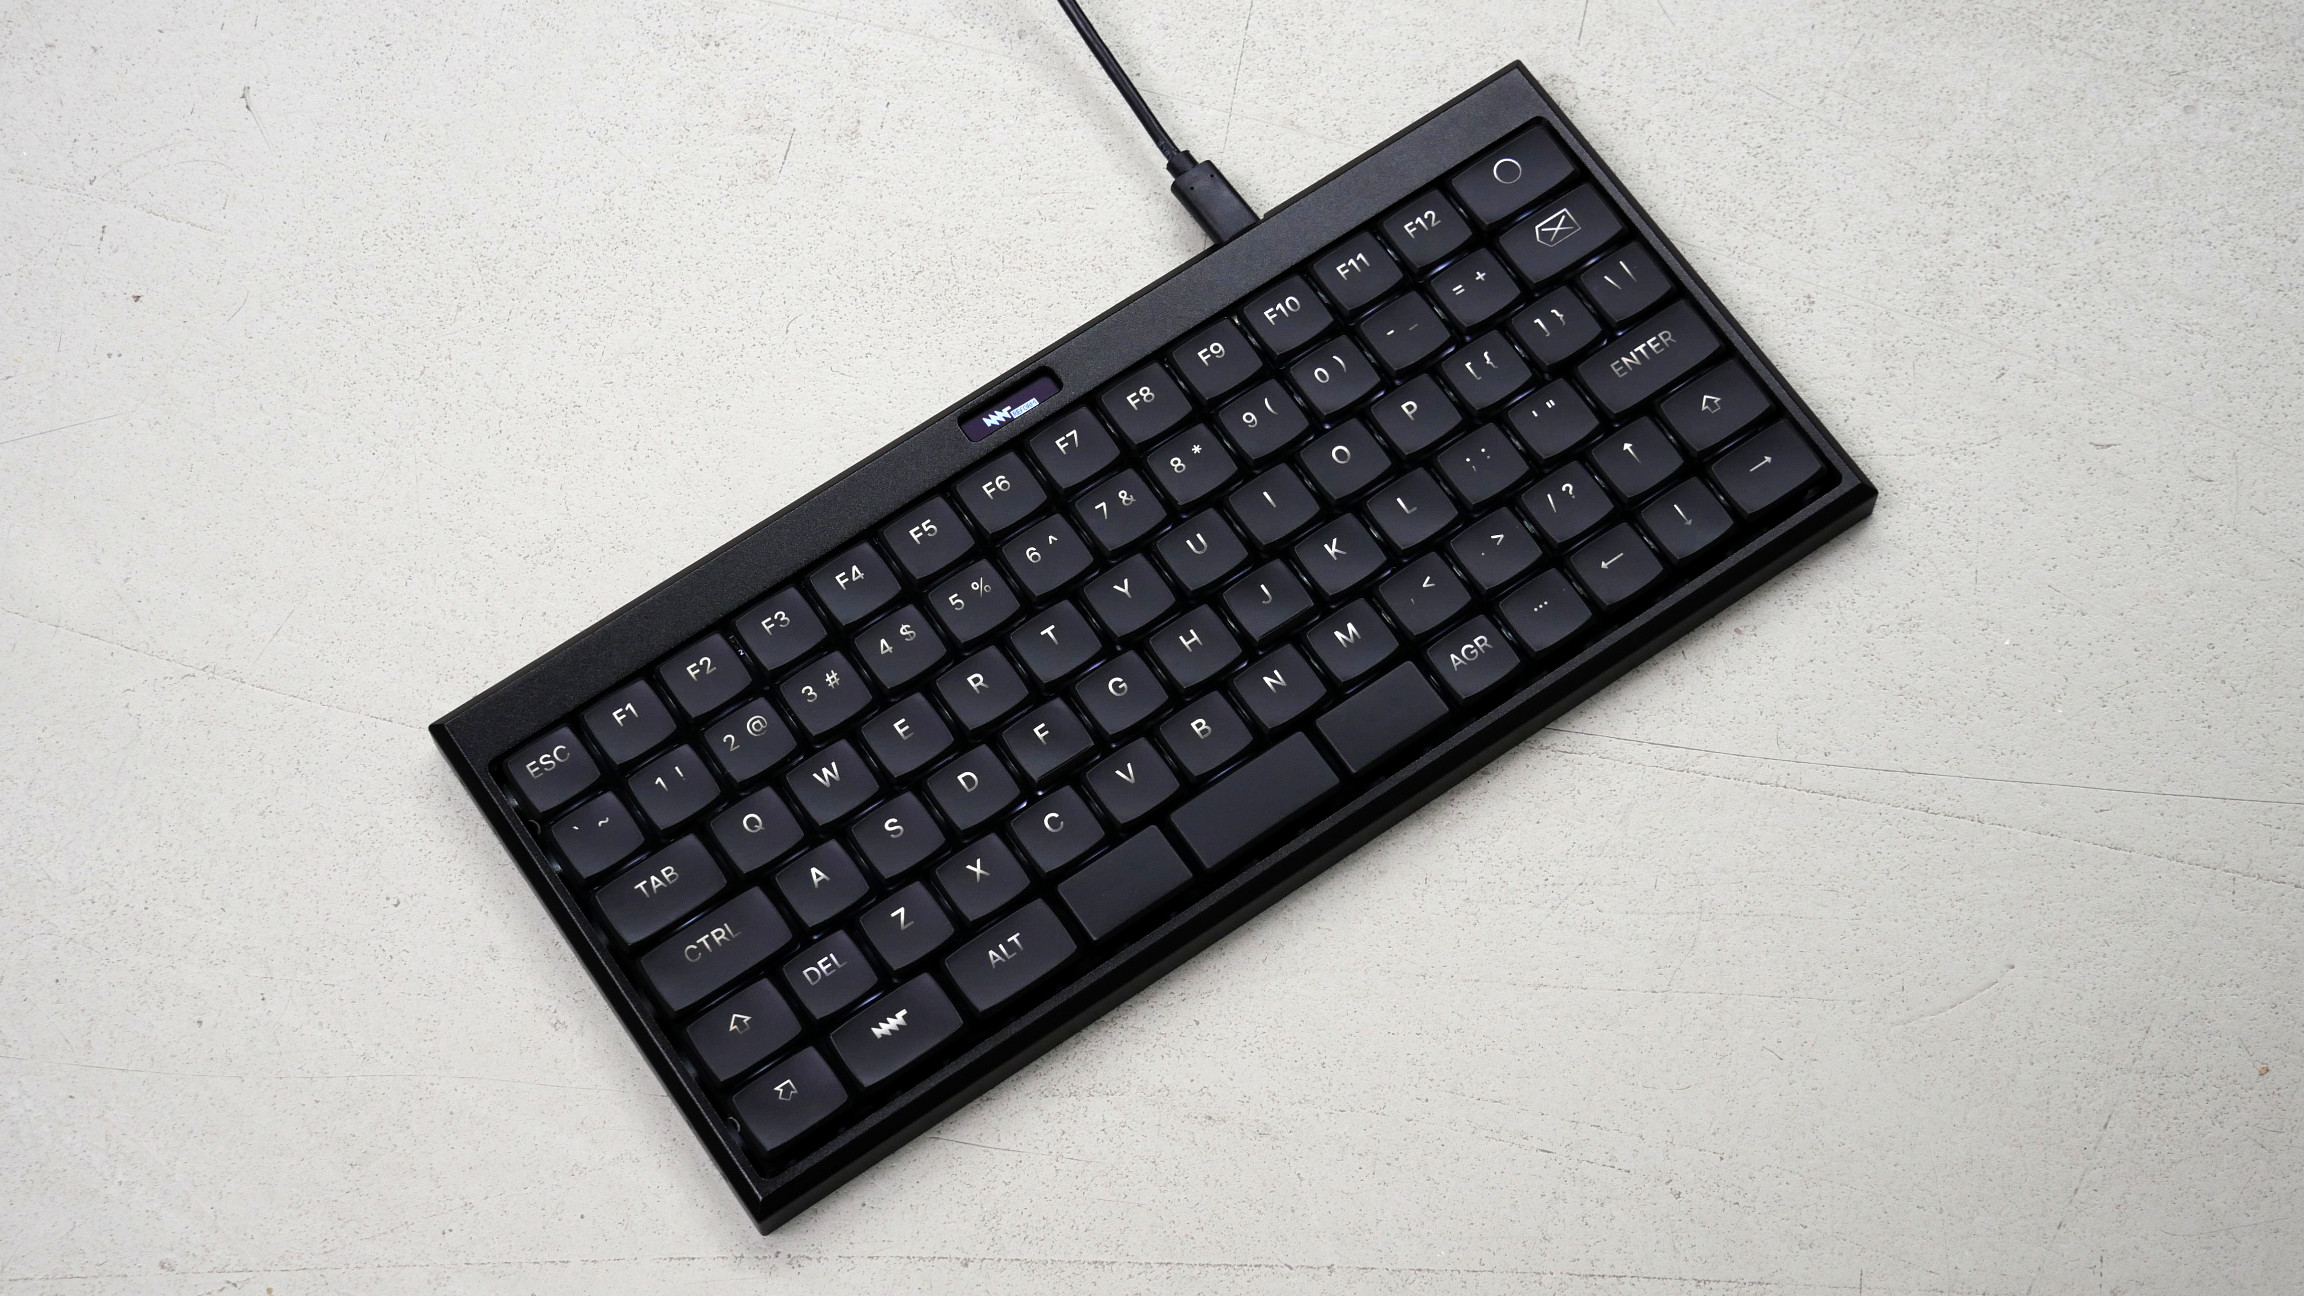 Small black keyboard with a small OLED display